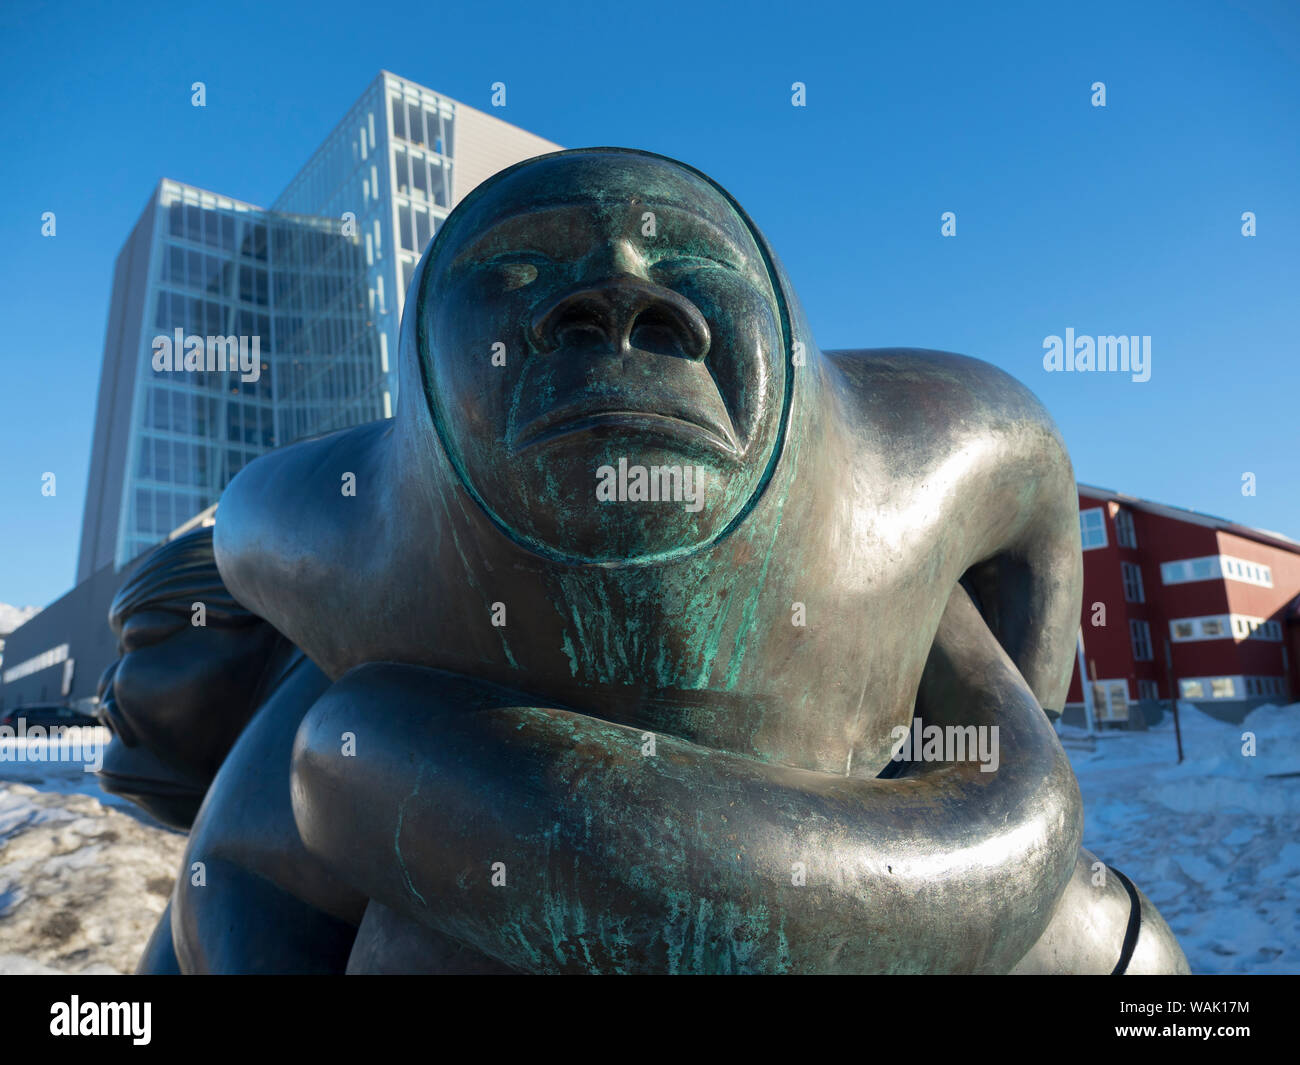 Kaassassuk sculpture by Simon Kristoffersen. Landmark and symbol of the Greenlandic identity as a country. Nuuk, capital of Greenland. (Editorial Use Only) Stock Photo